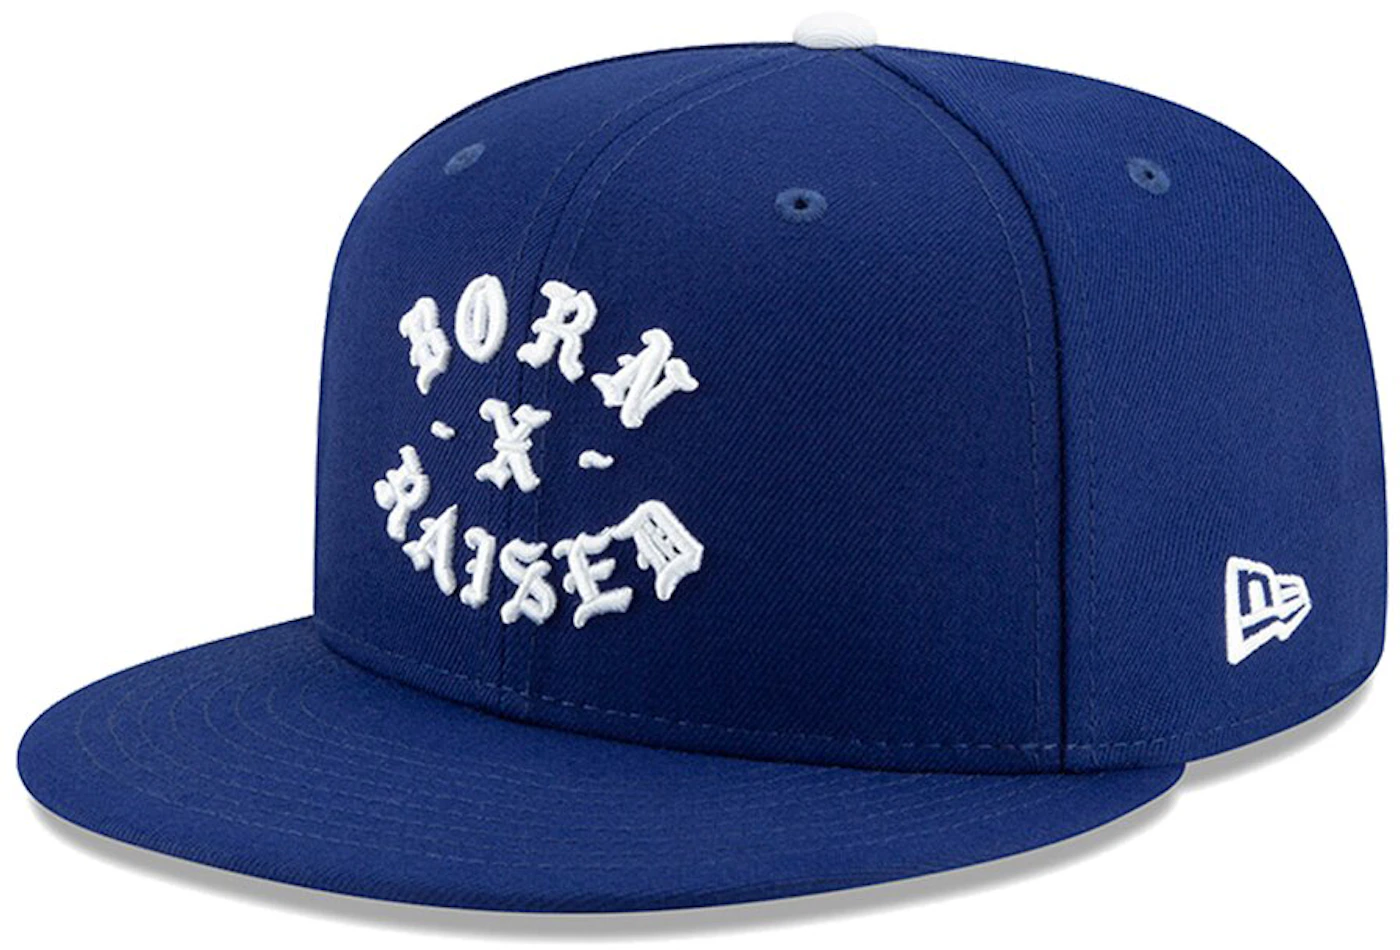 Born X Raised Los Angeles Dodgers Fitted Hat Blue Men's - FW19 - US